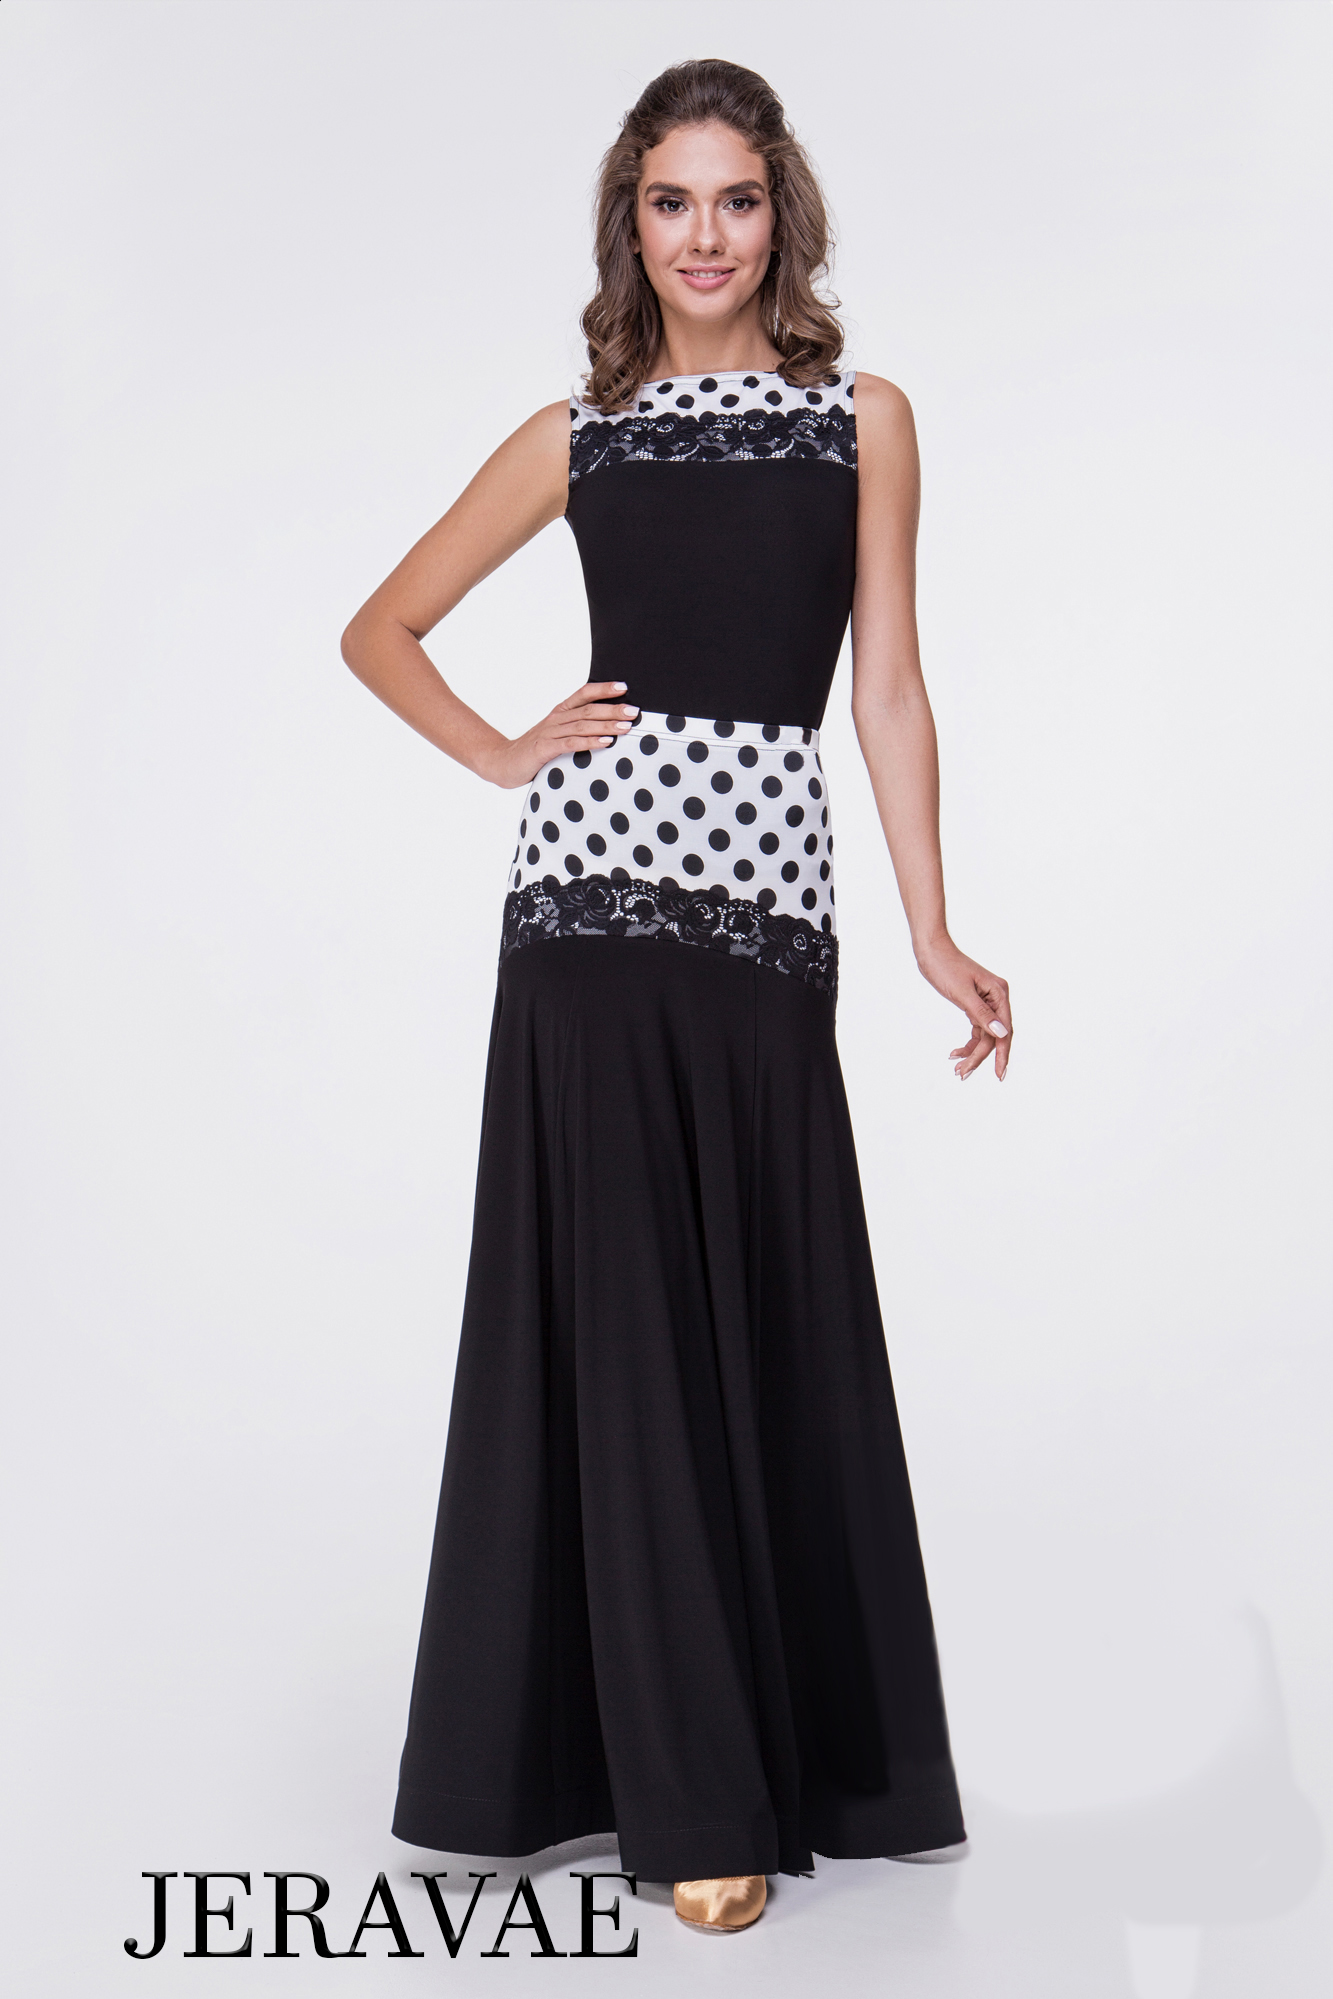 Adorable White and Black Polka Dot Ballroom Practice Skirt with Lace Accent and Matching Sleeveless Practice Top  PRA 542